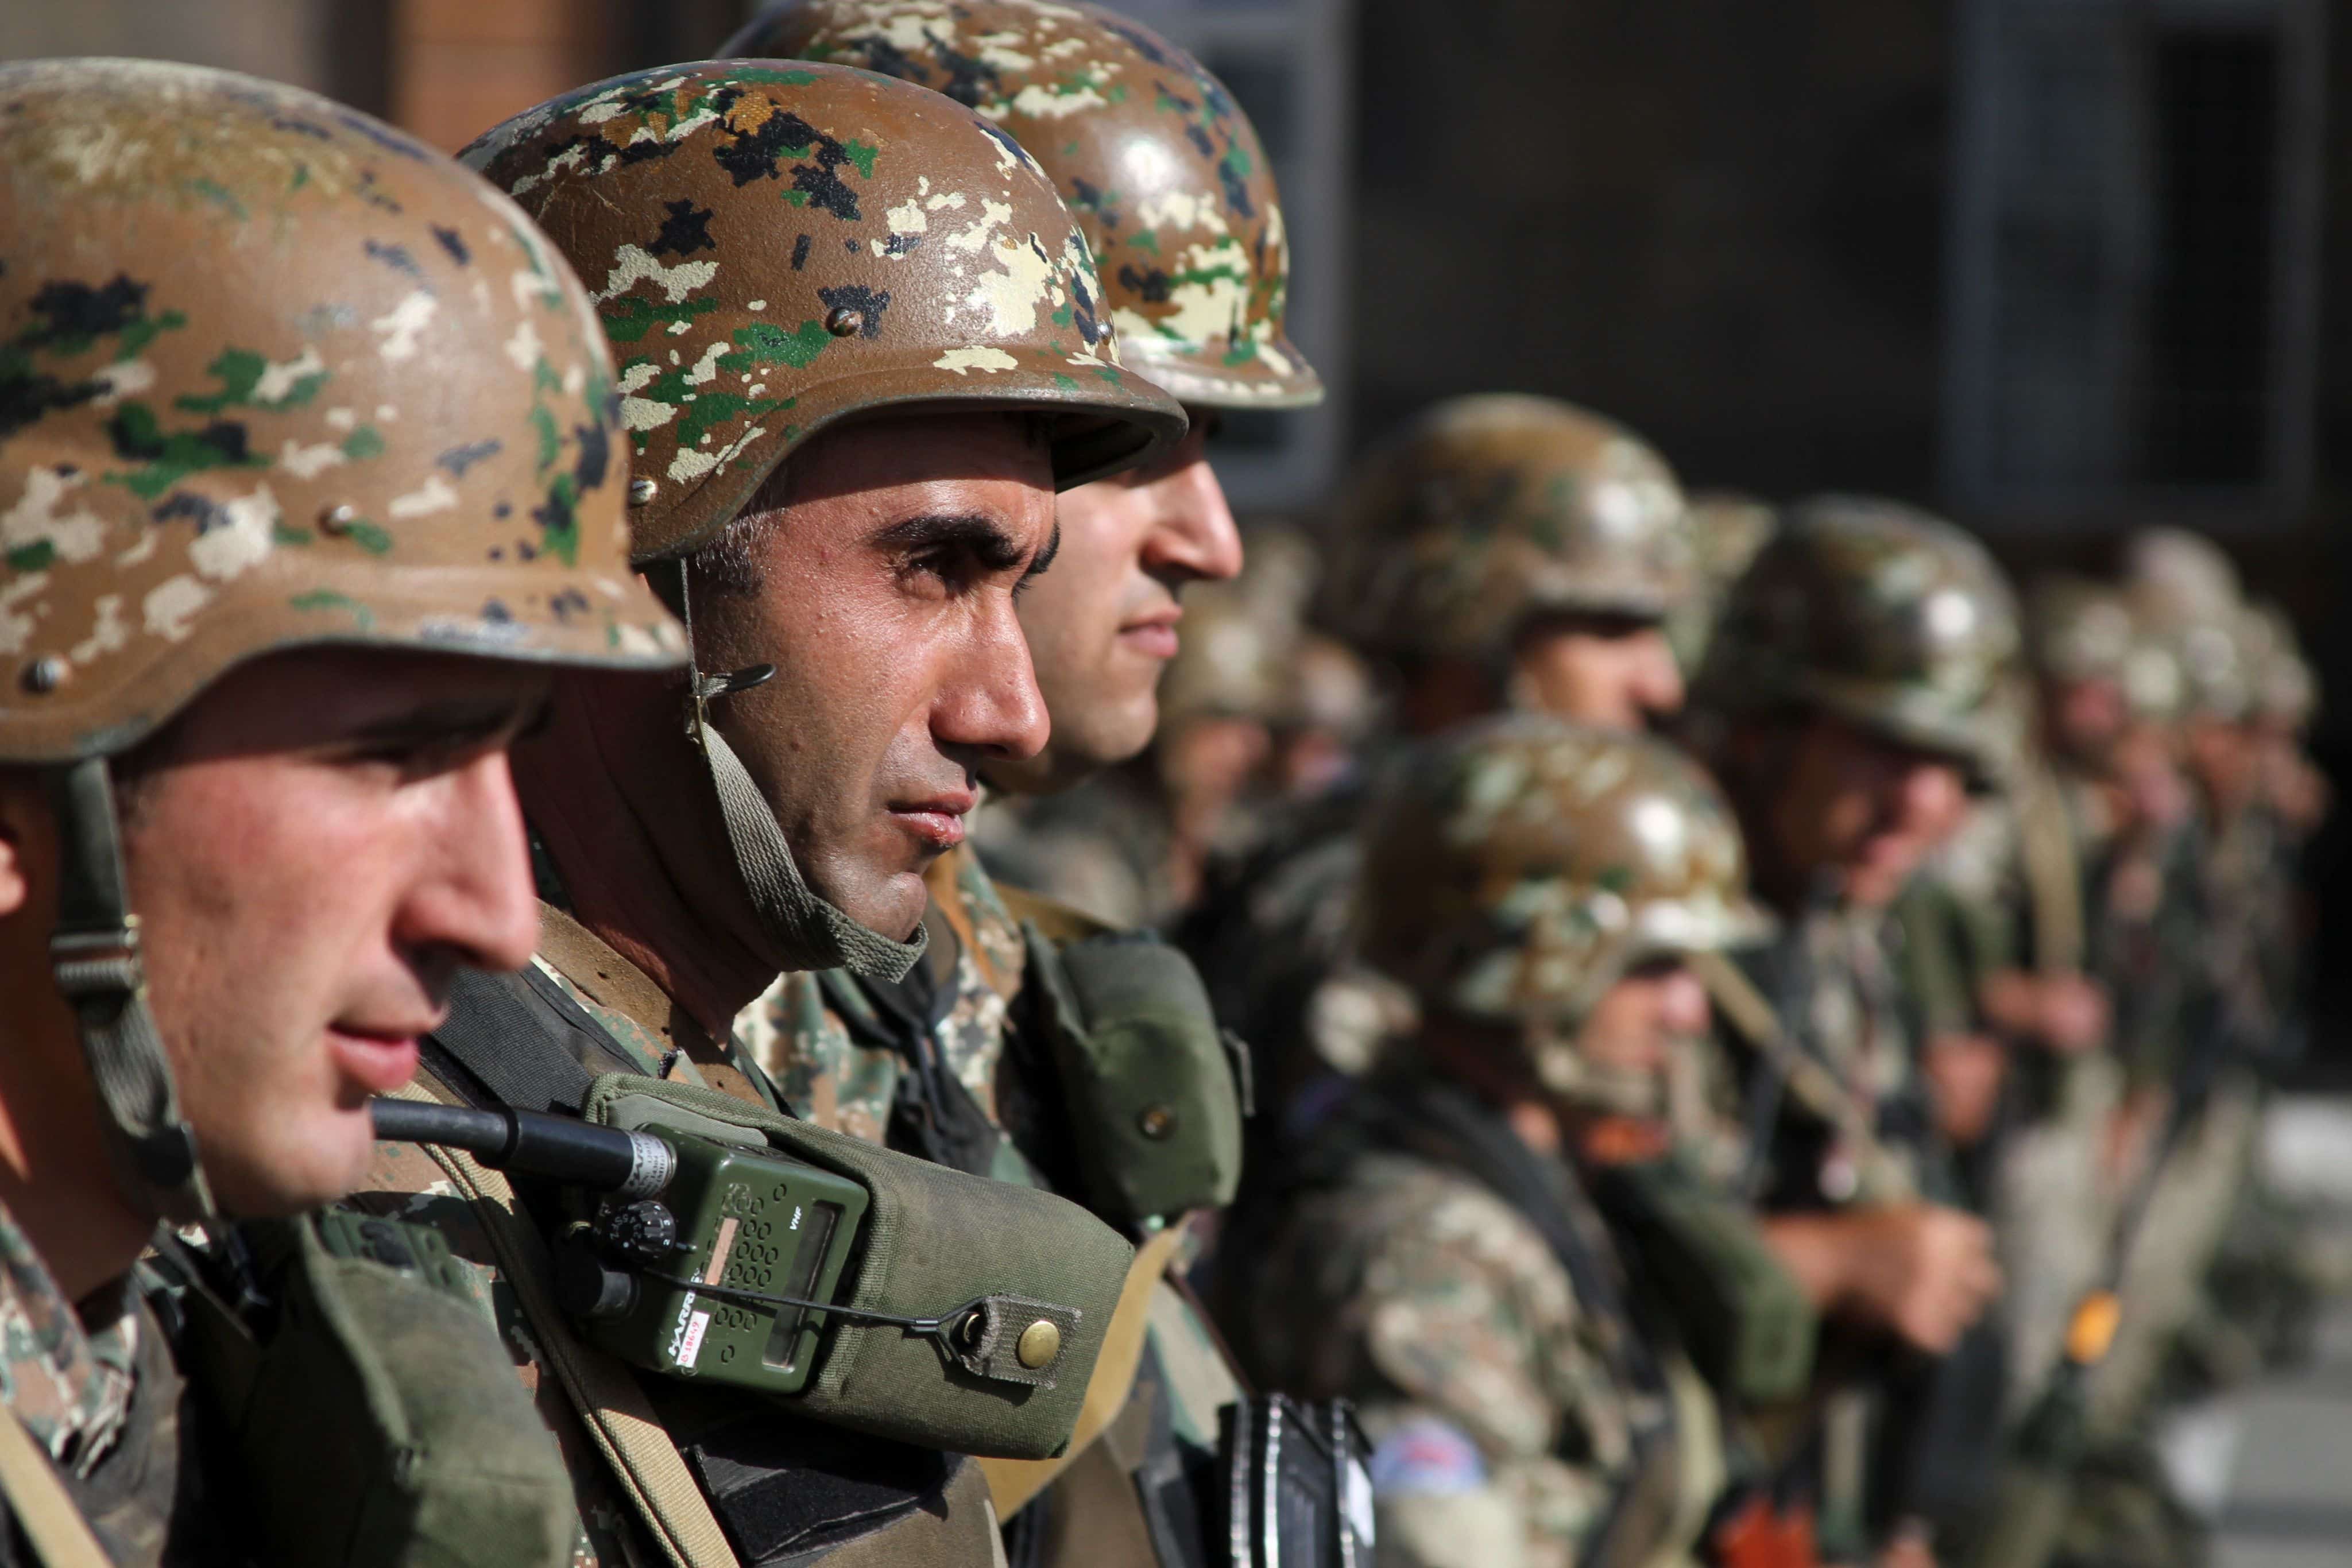 Soldiers with the Armenian Armed Forces Peacekeeping Brigade received certification as a NATO partner following an exercise in the Republic of Armenia Sept. 15-18, 2015. The brigade earned the certification by passing the second-level evaluation of the Operational Capabilities Concept of NATO's Partnership for Peace program. The certification solidifies Armenia's capabilities to support NATO peacekeeping operations, culminating years of preparation with assistance and guidance from the Kansas National Guard through the National Guard Bureau's State Partnership Program. (U.S. Army National Guard photo by Sgt. Zach Sheely/Released)